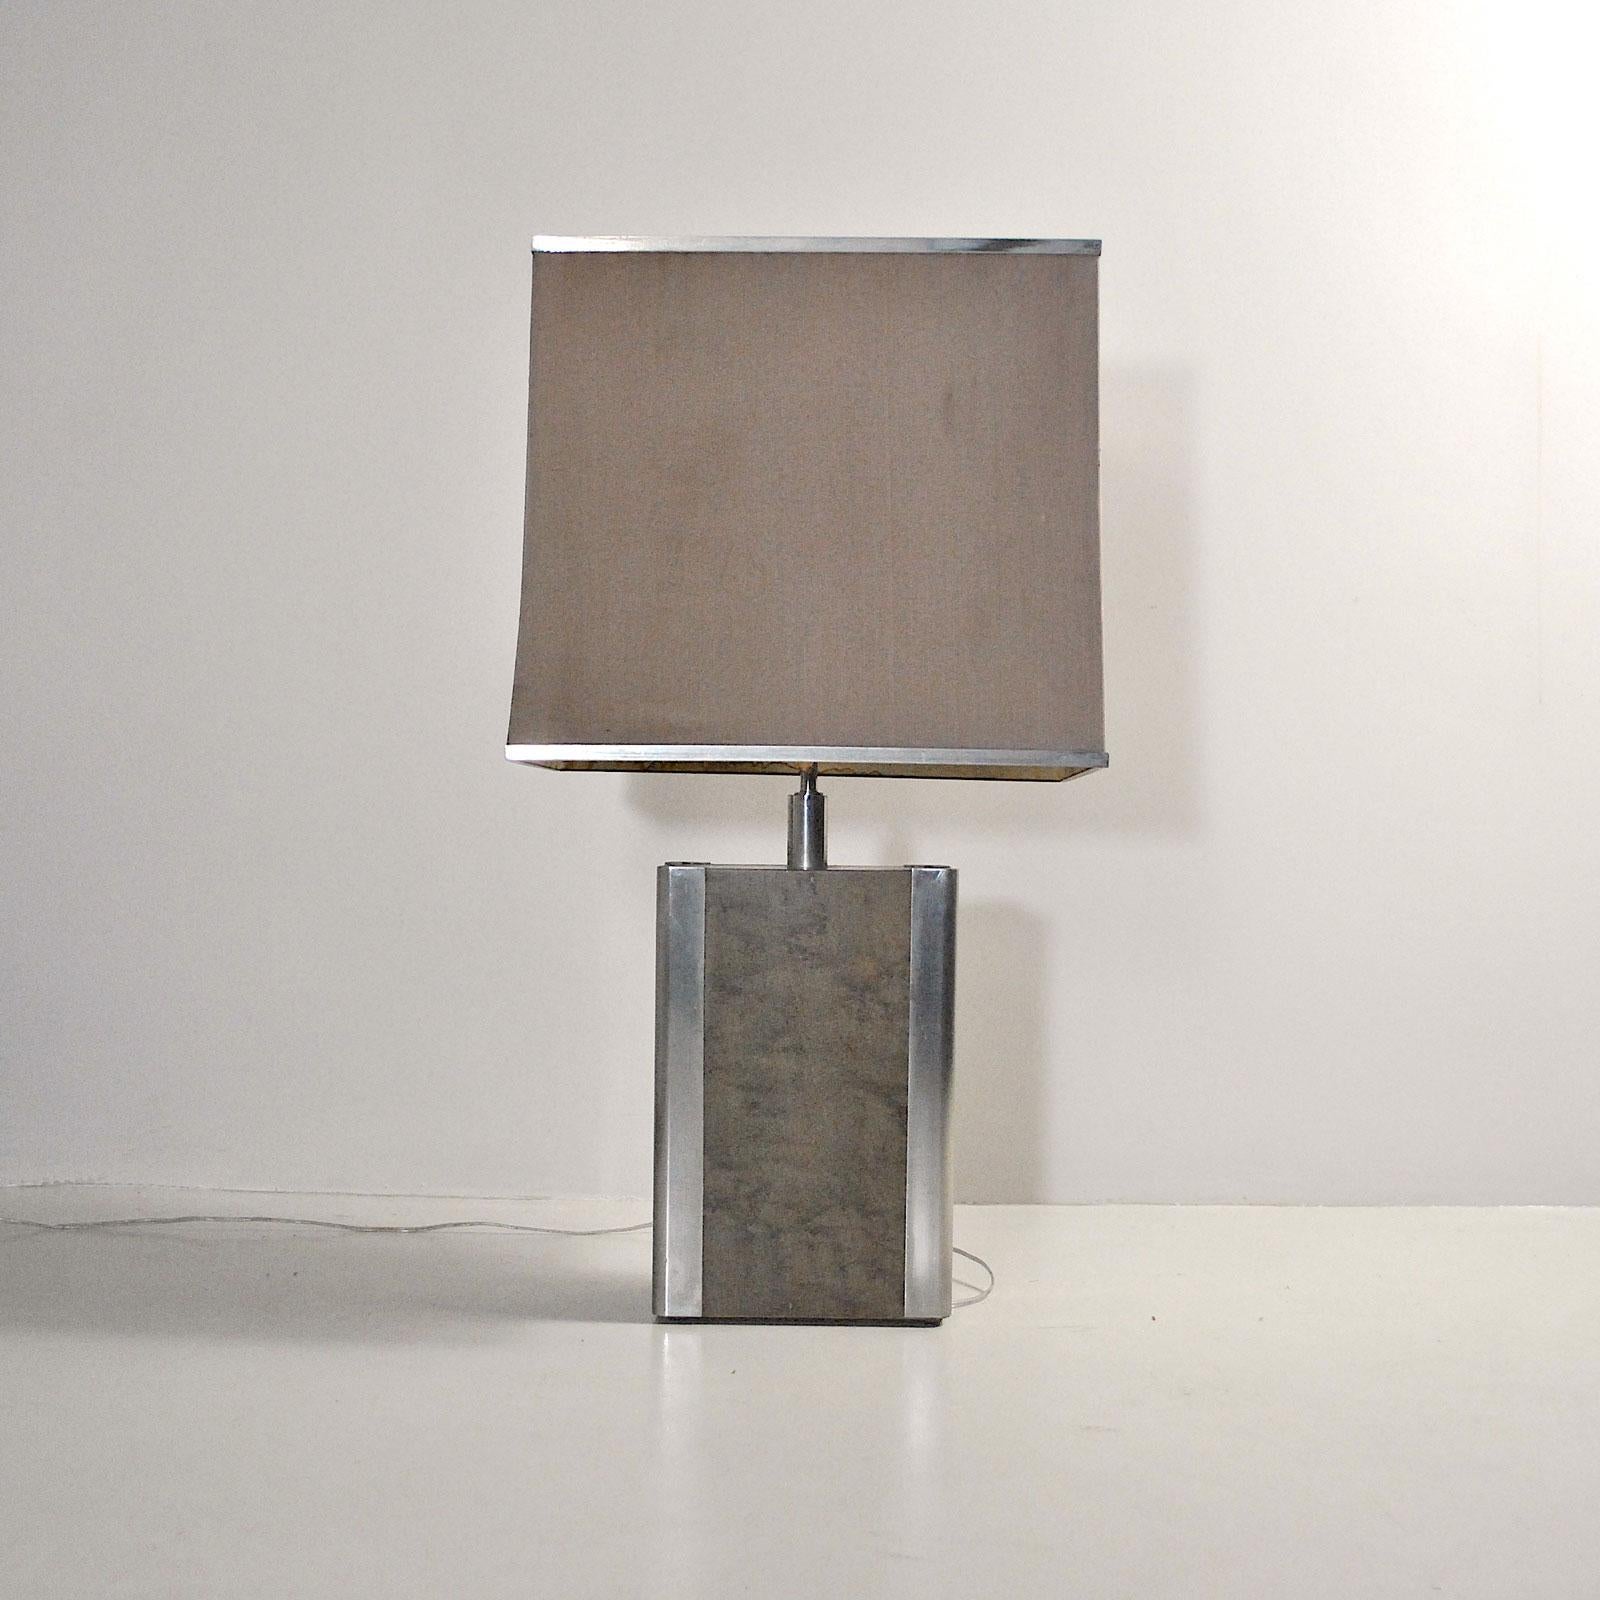 Mid-Century Modern Italian Midcentury Table Lamp in Drawn Wood and Steel from the 1970s